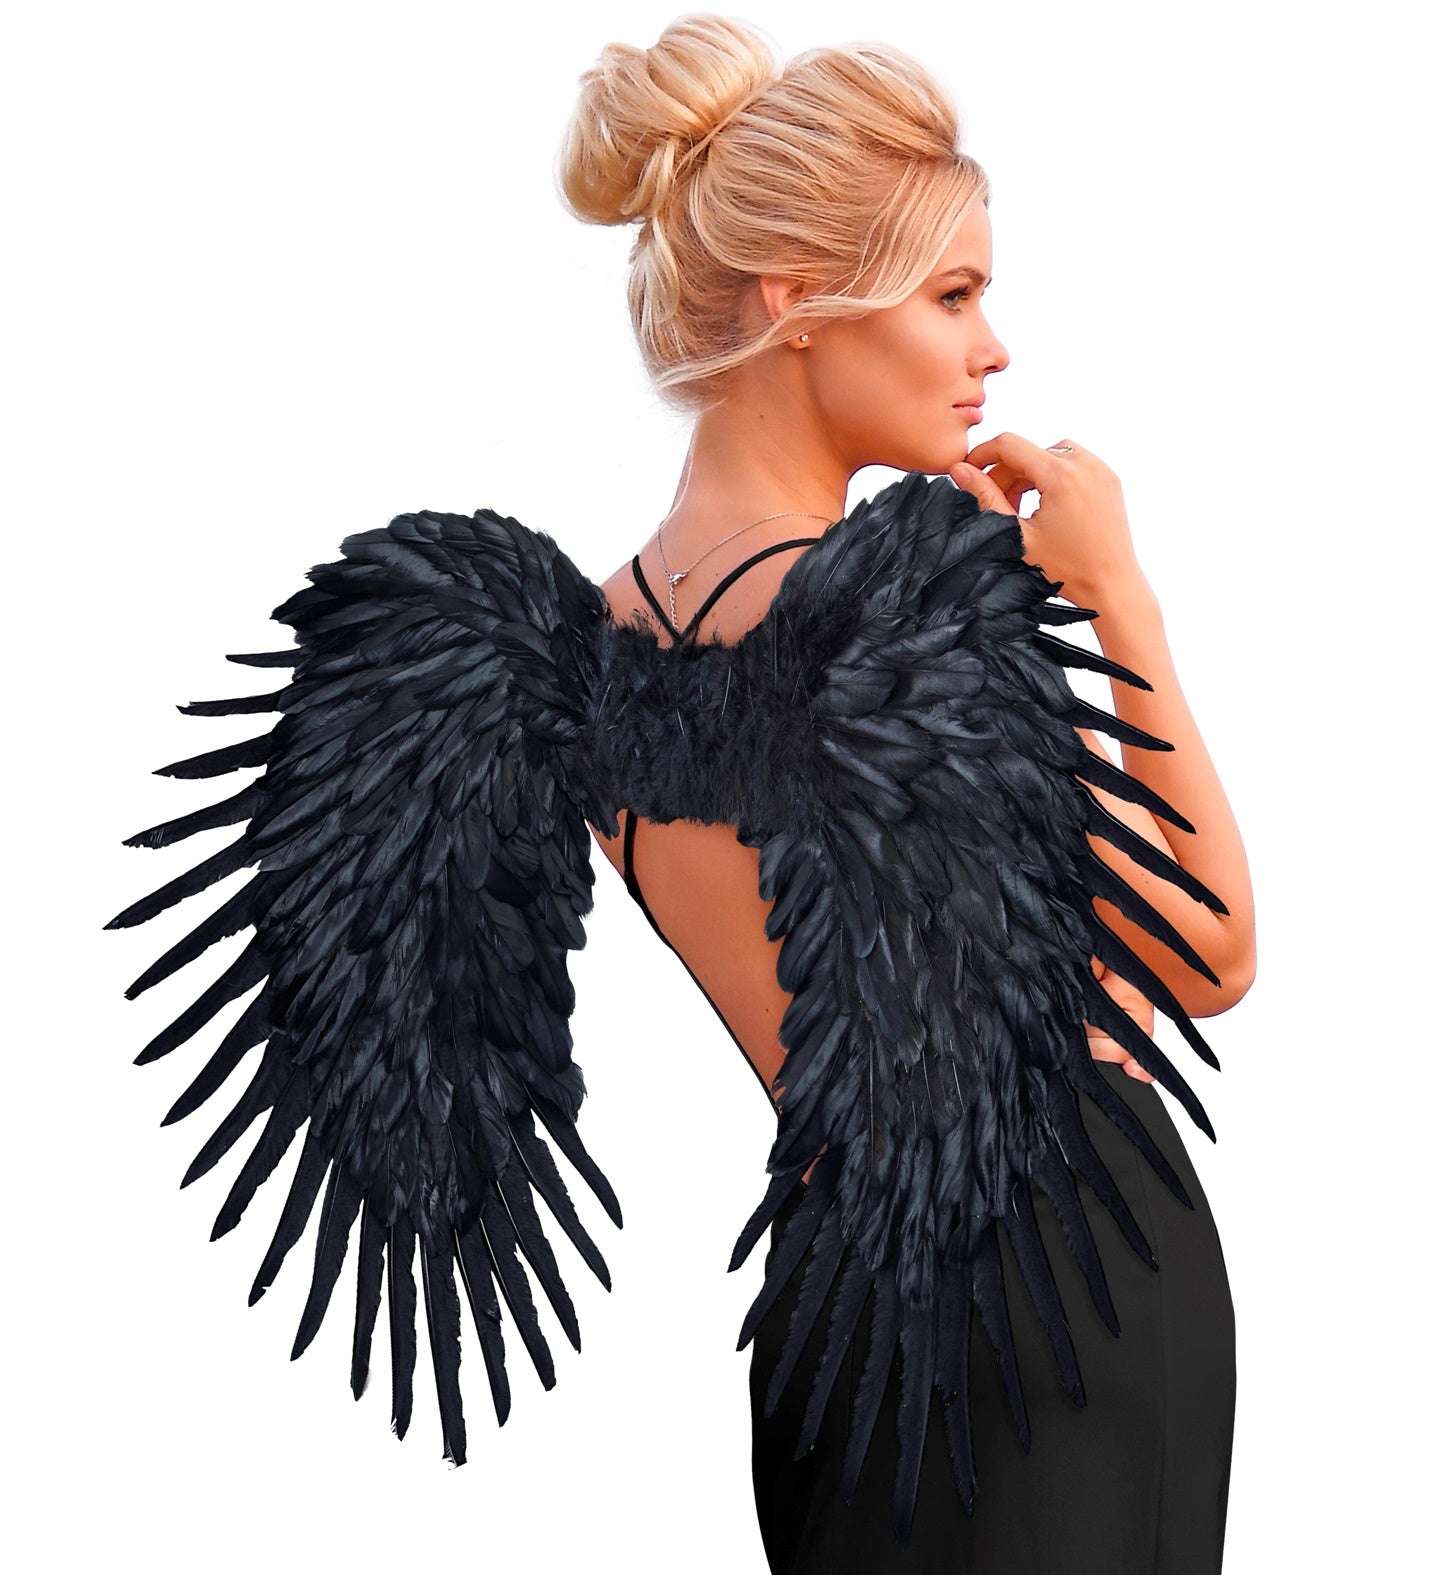 Deluxe Large Black Feather Wings 80 X 60cm